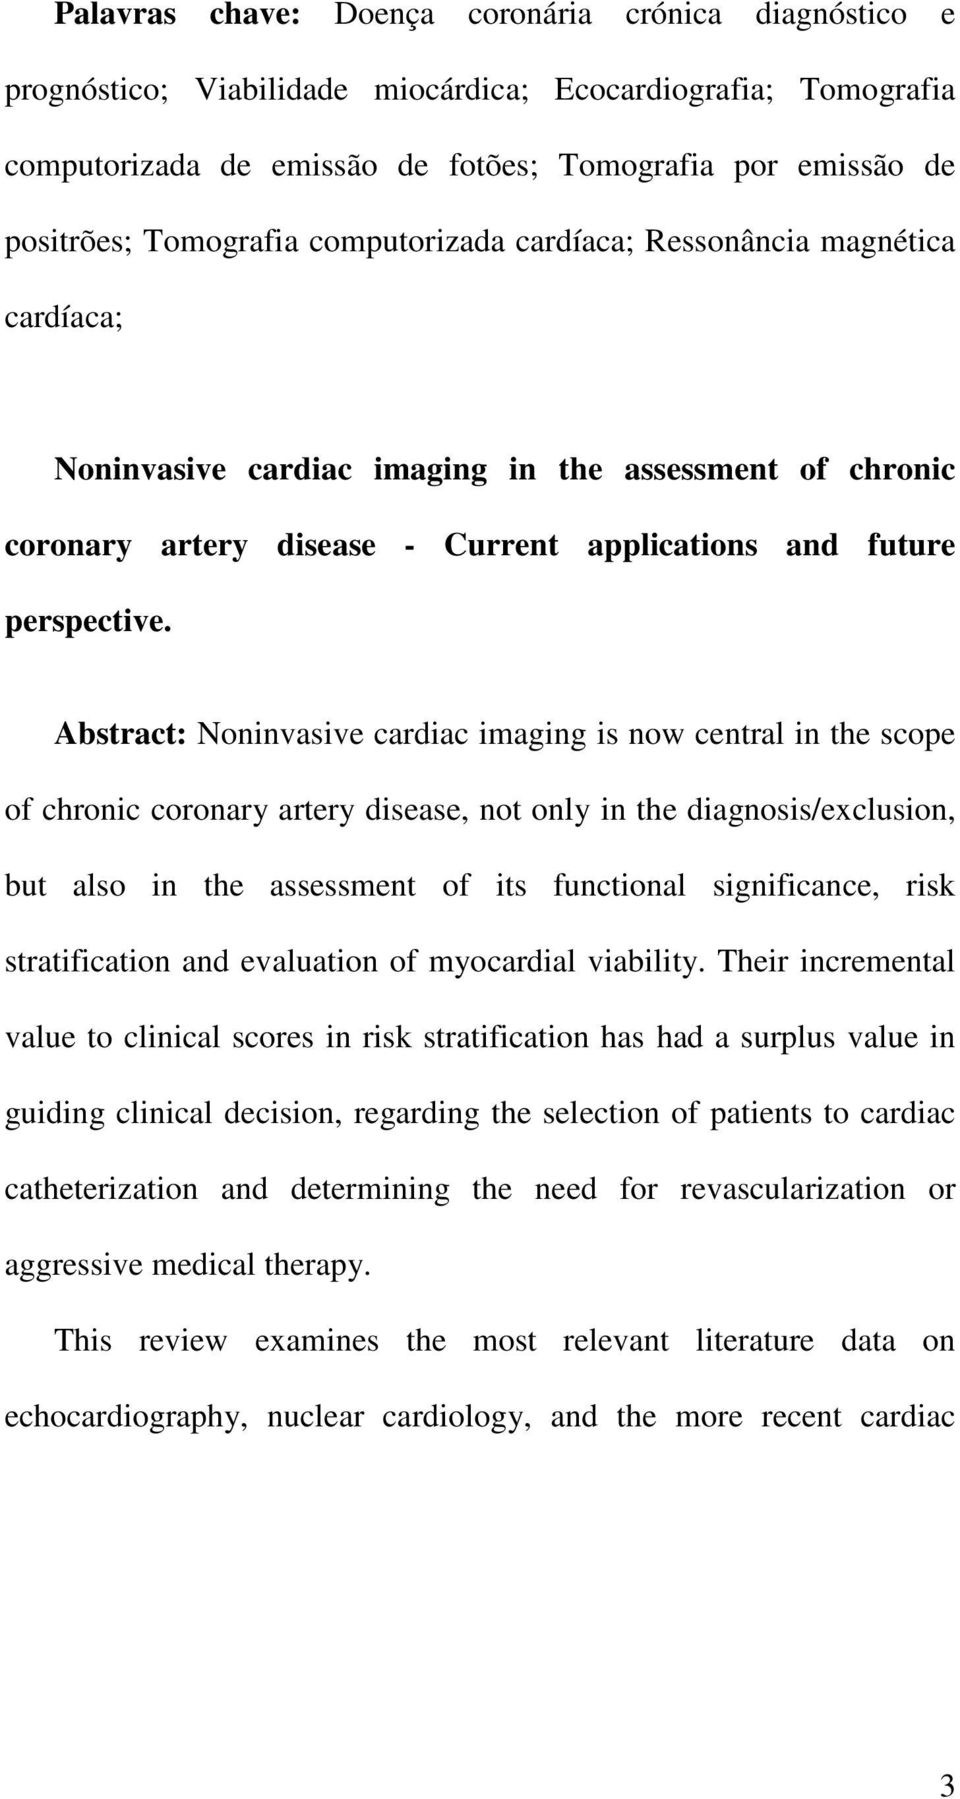 Abstract: Noninvasive cardiac imaging is now central in the scope of chronic coronary artery disease, not only in the diagnosis/exclusion, but also in the assessment of its functional significance,